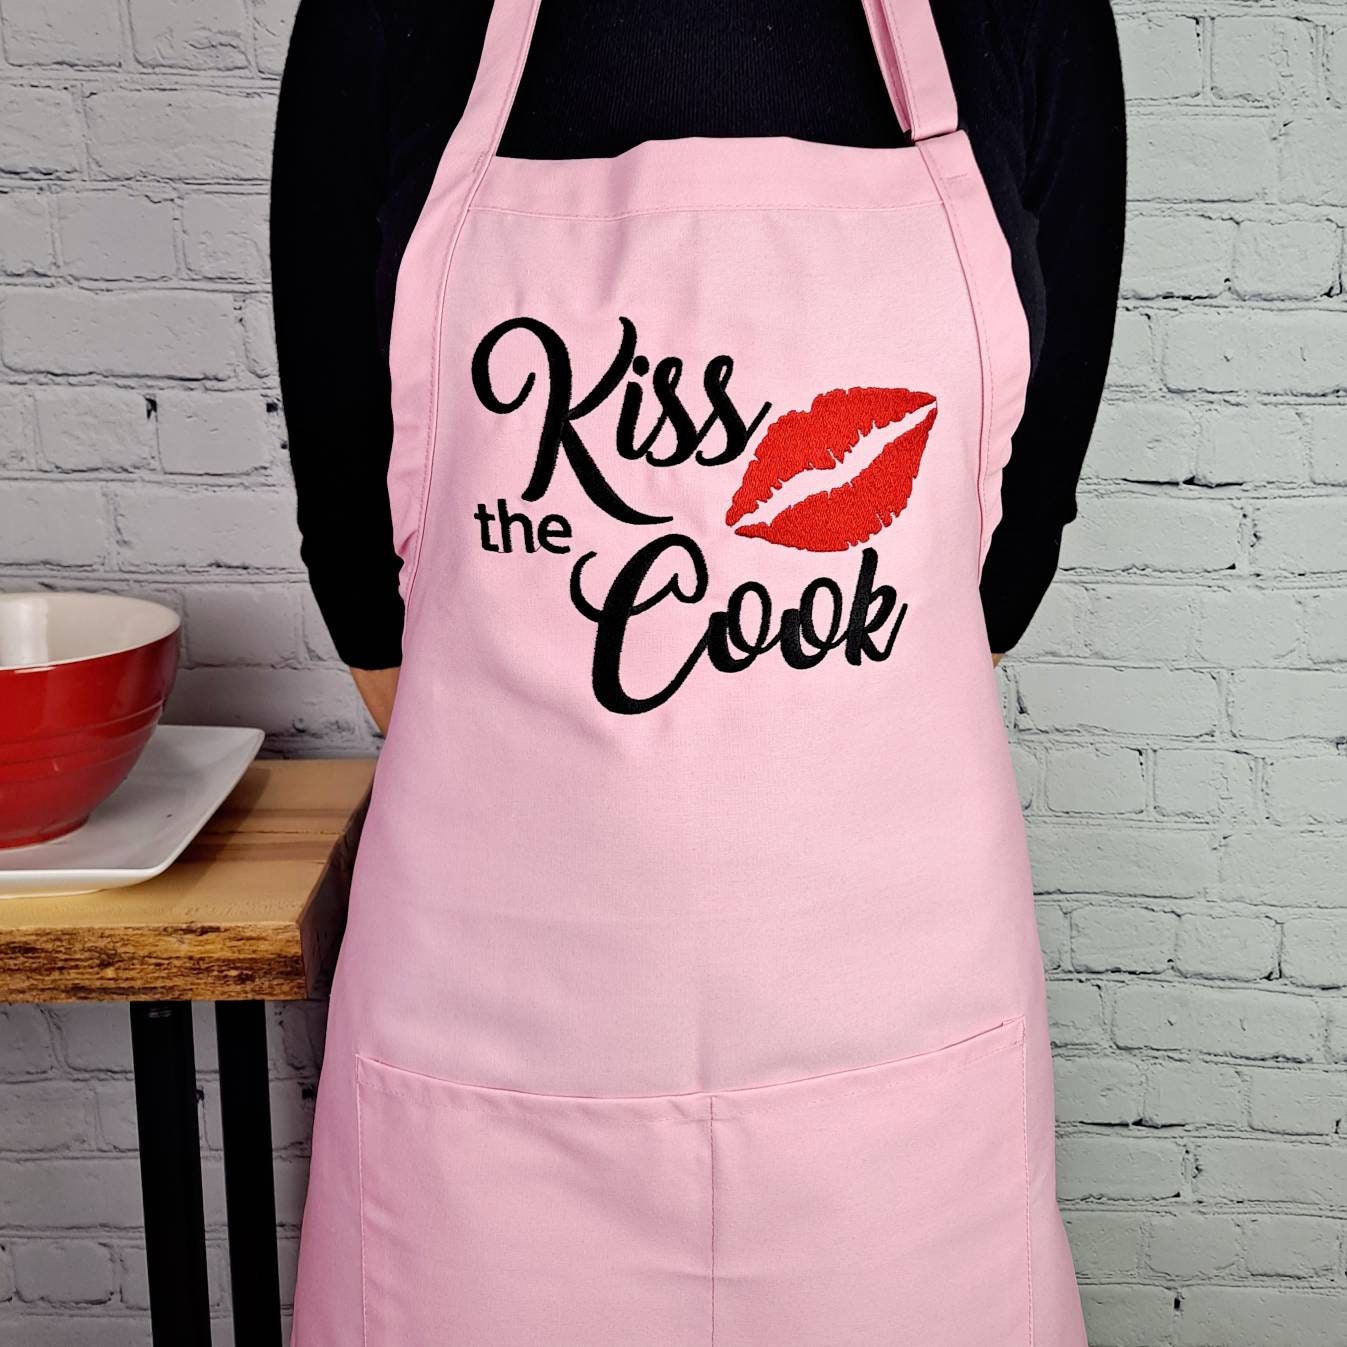 My Kissin' is Better than my Cookin' Apron, Kitchen Gifts for Mom